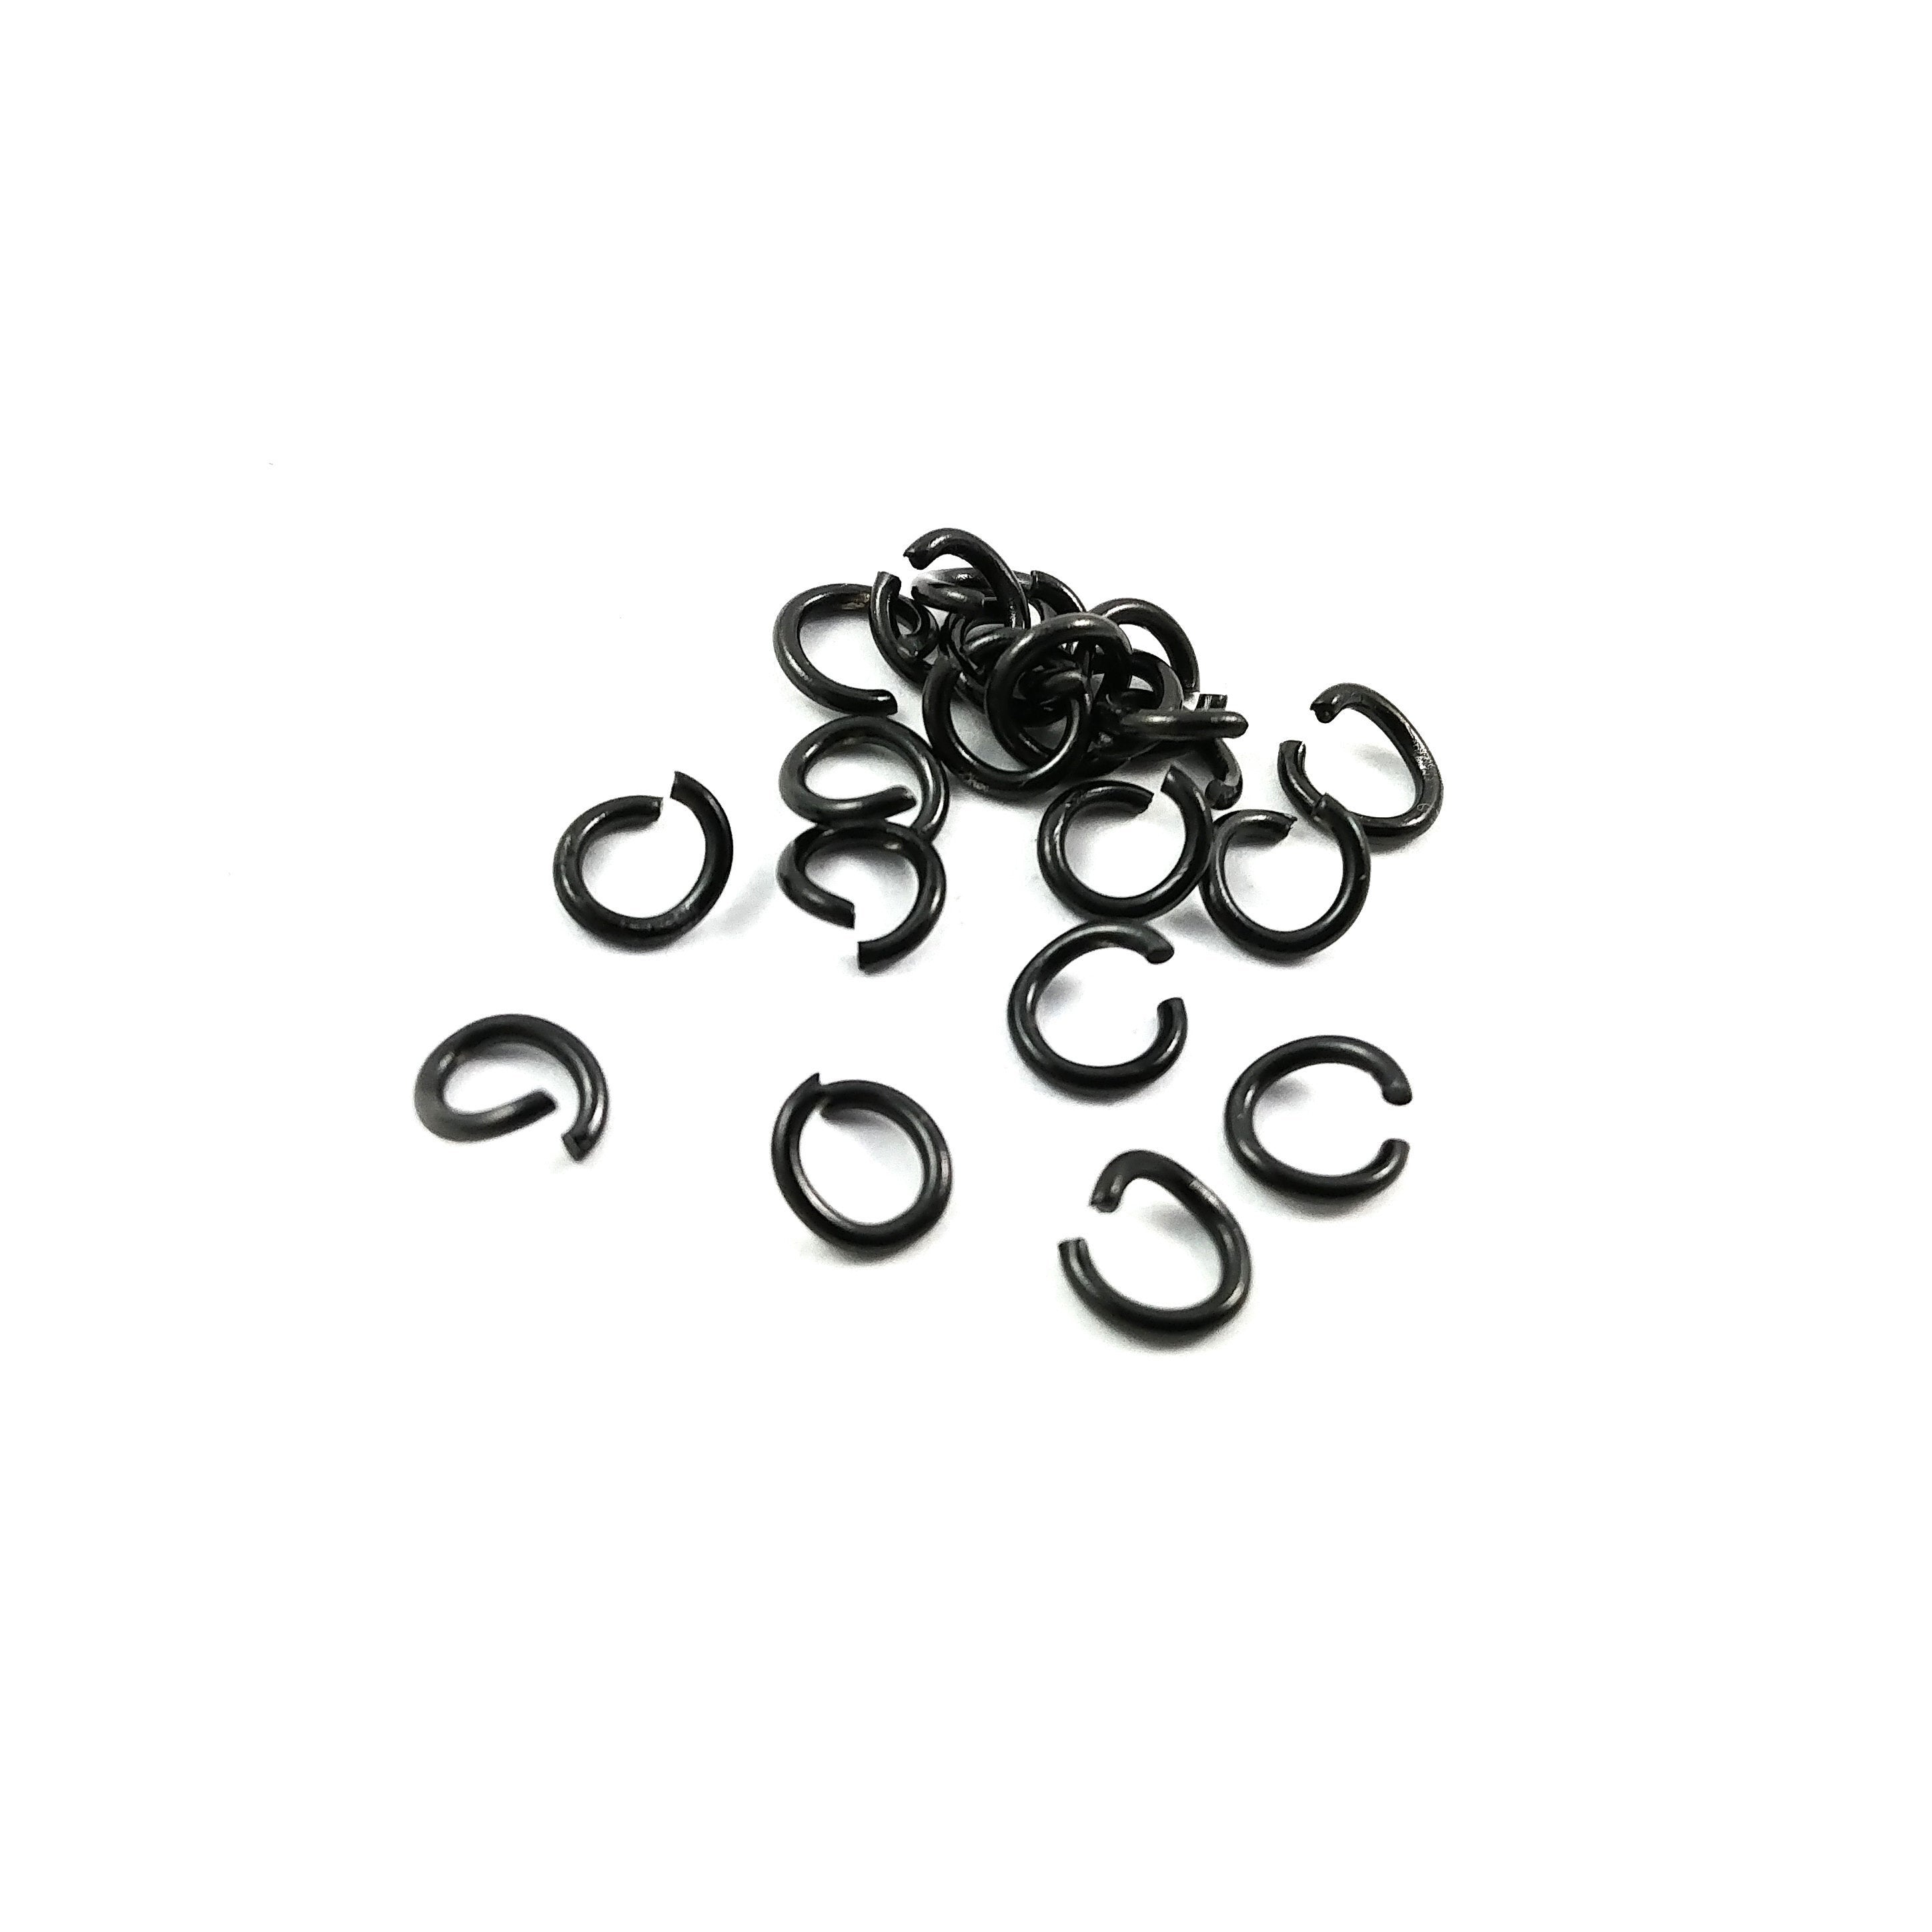 .080 Inch Large Oval Jump Rings - Nickel Plated Steel